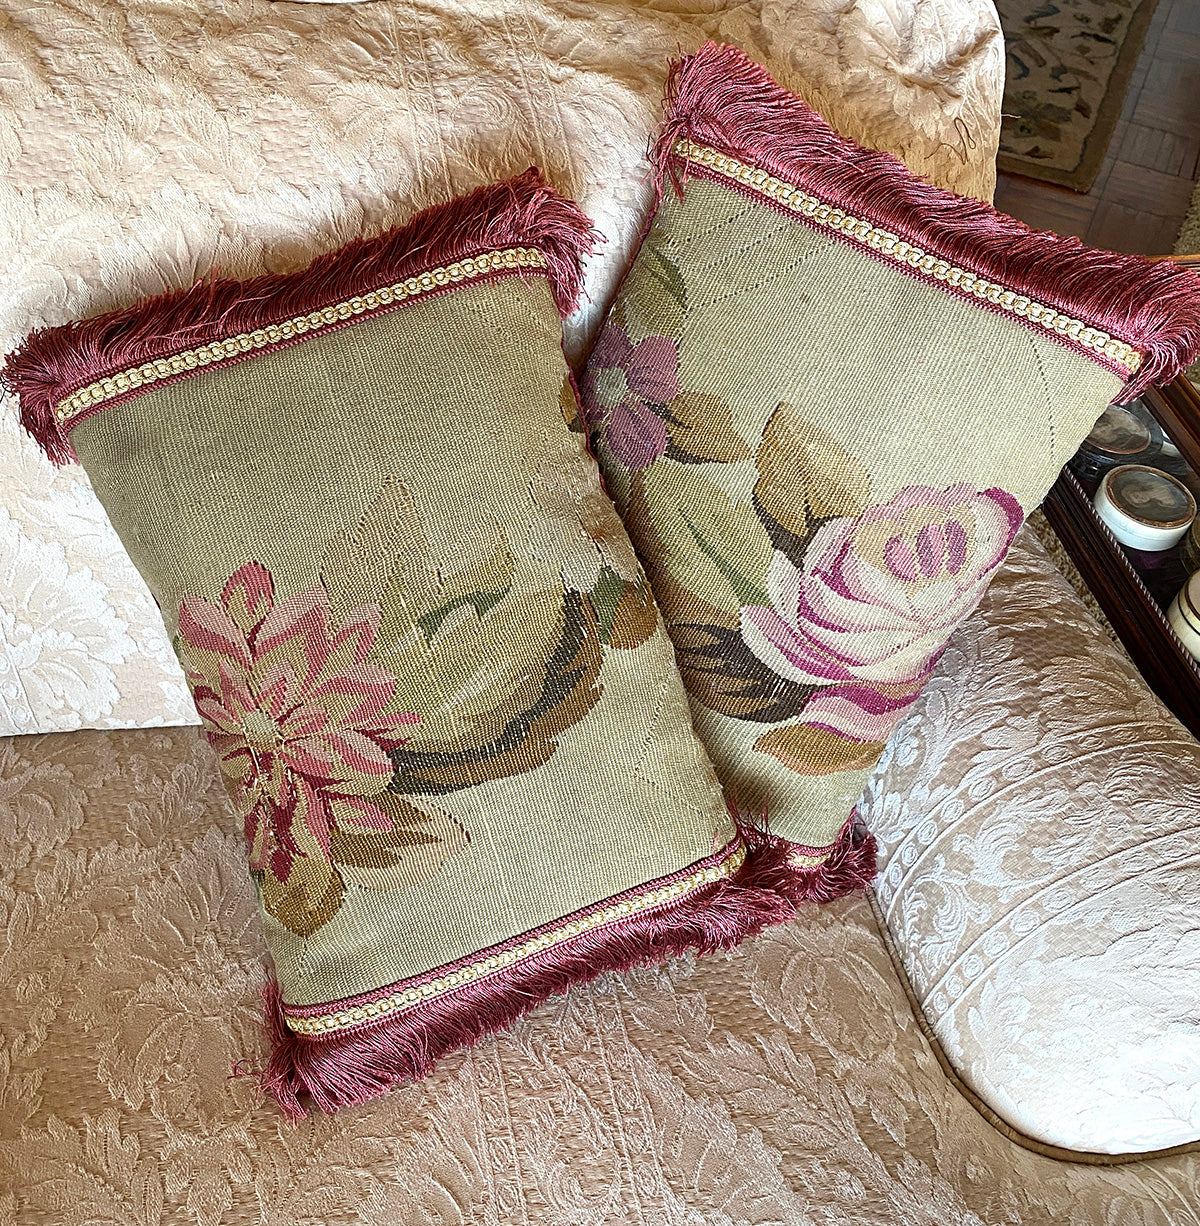 Antique 18th Century French Aubusson Tapestry Fragment & Passementerie Throw Pillow Pair